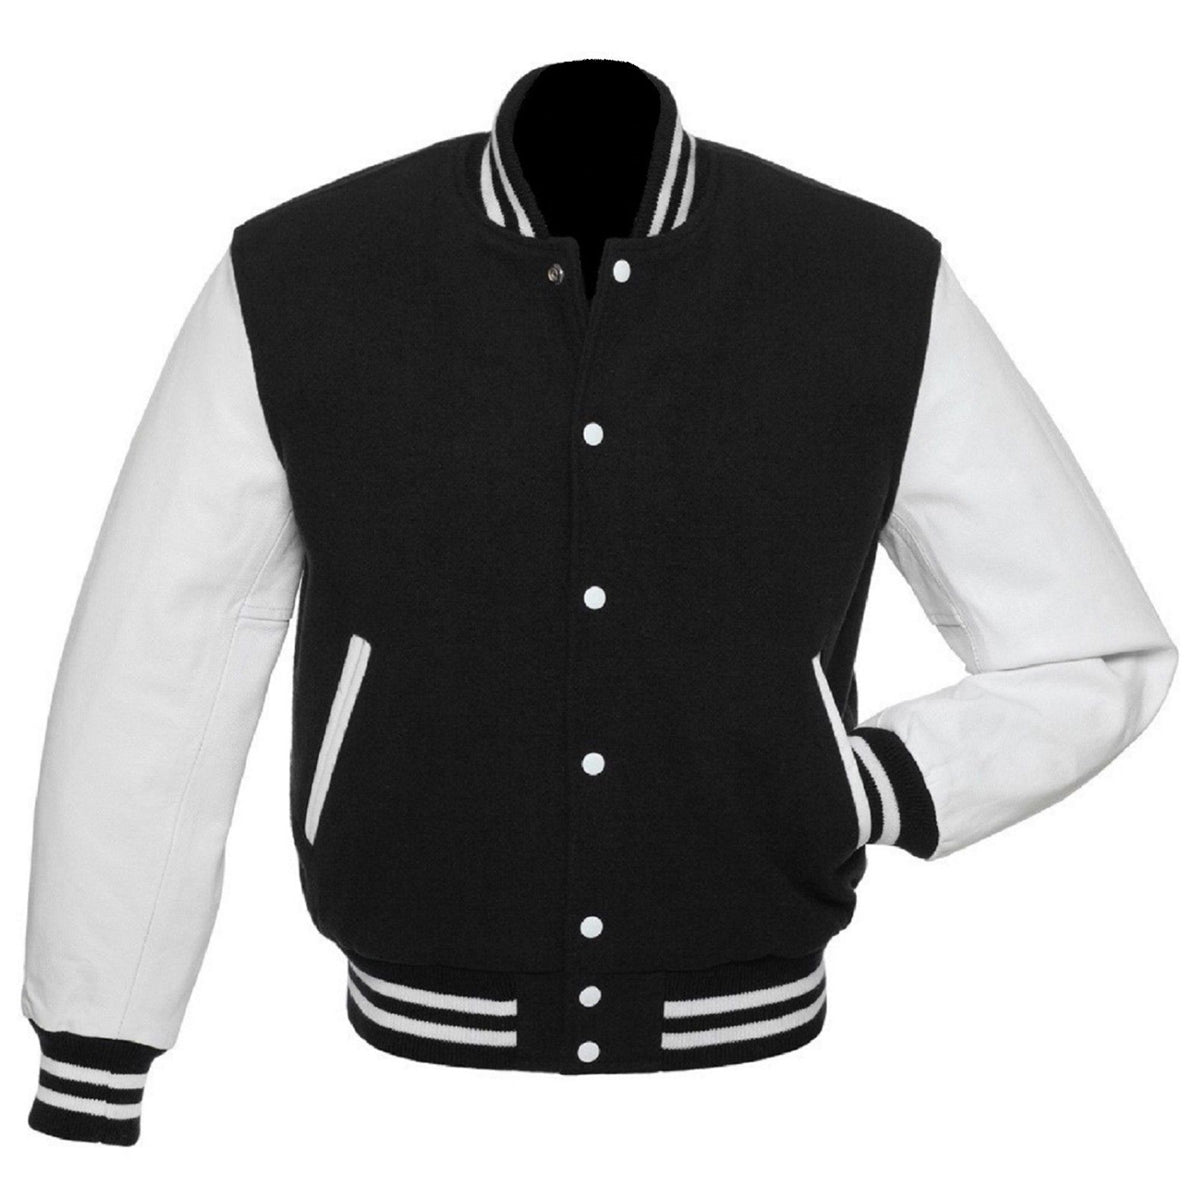 Topman wool mix varsity jacket with faux leather sleeves in black and white